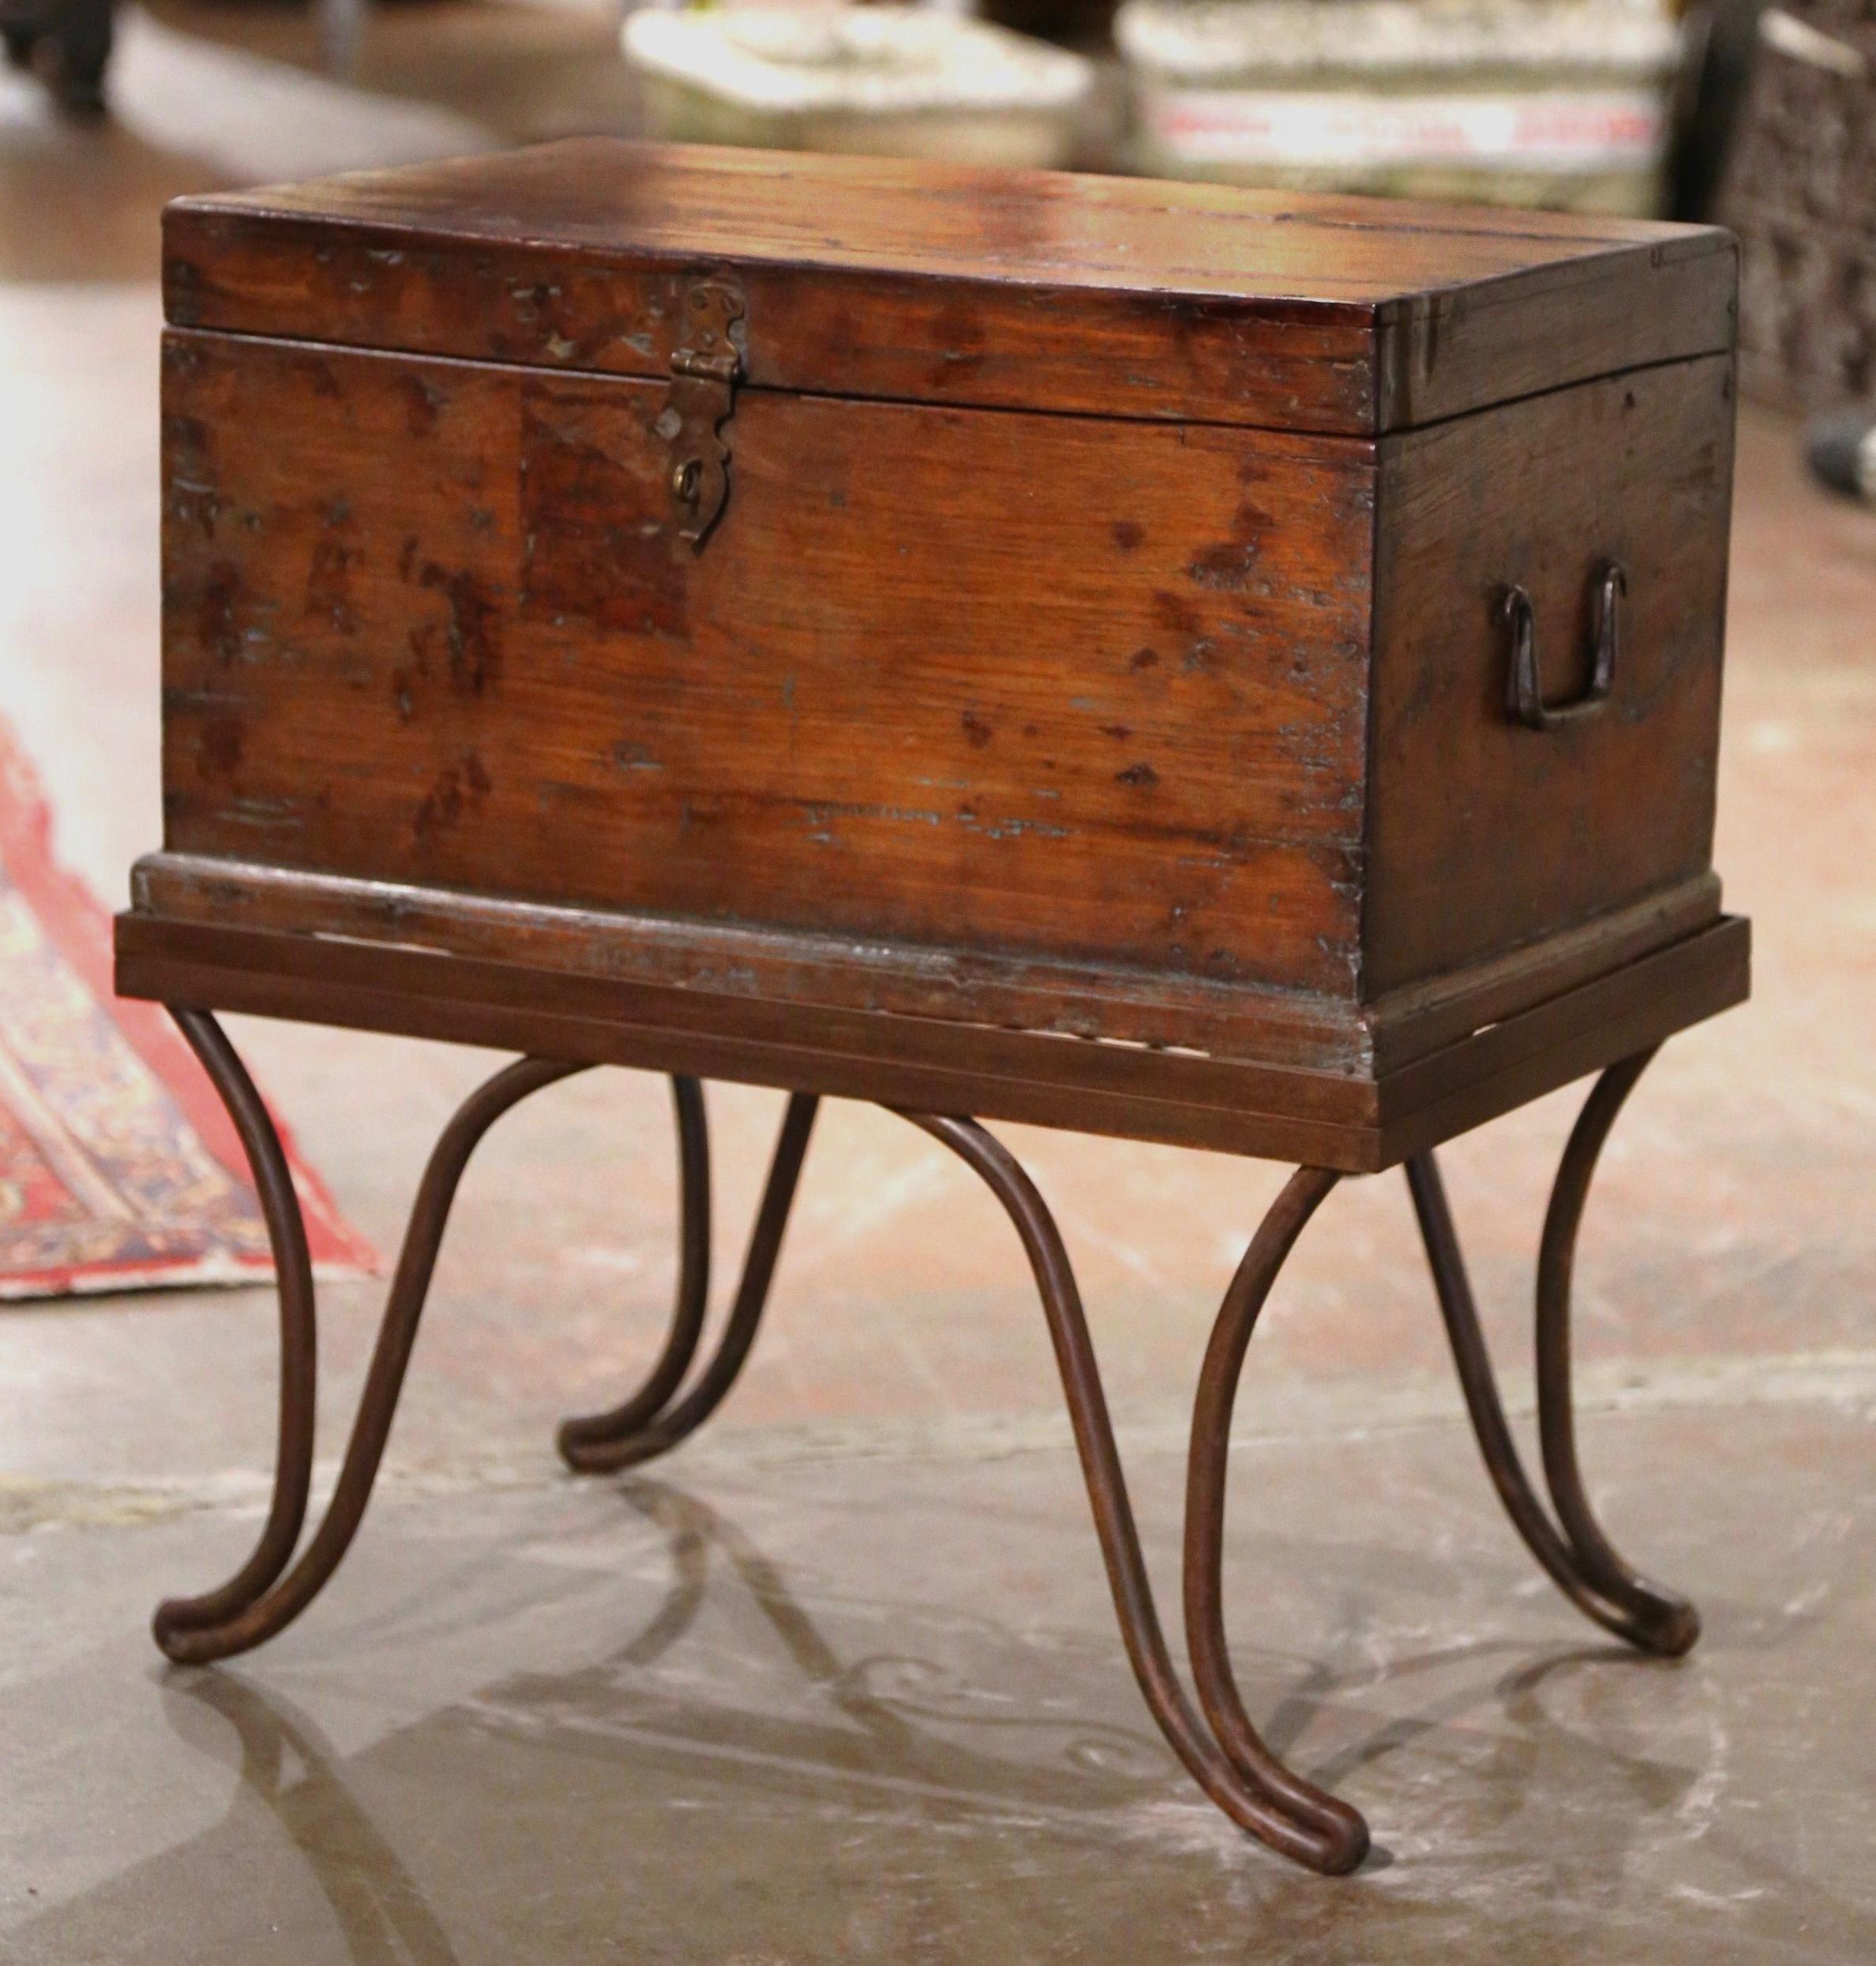 Patinated Mid-19th Century French Carved Oak Chest Trunk Side Table on Wrought Iron Stand For Sale